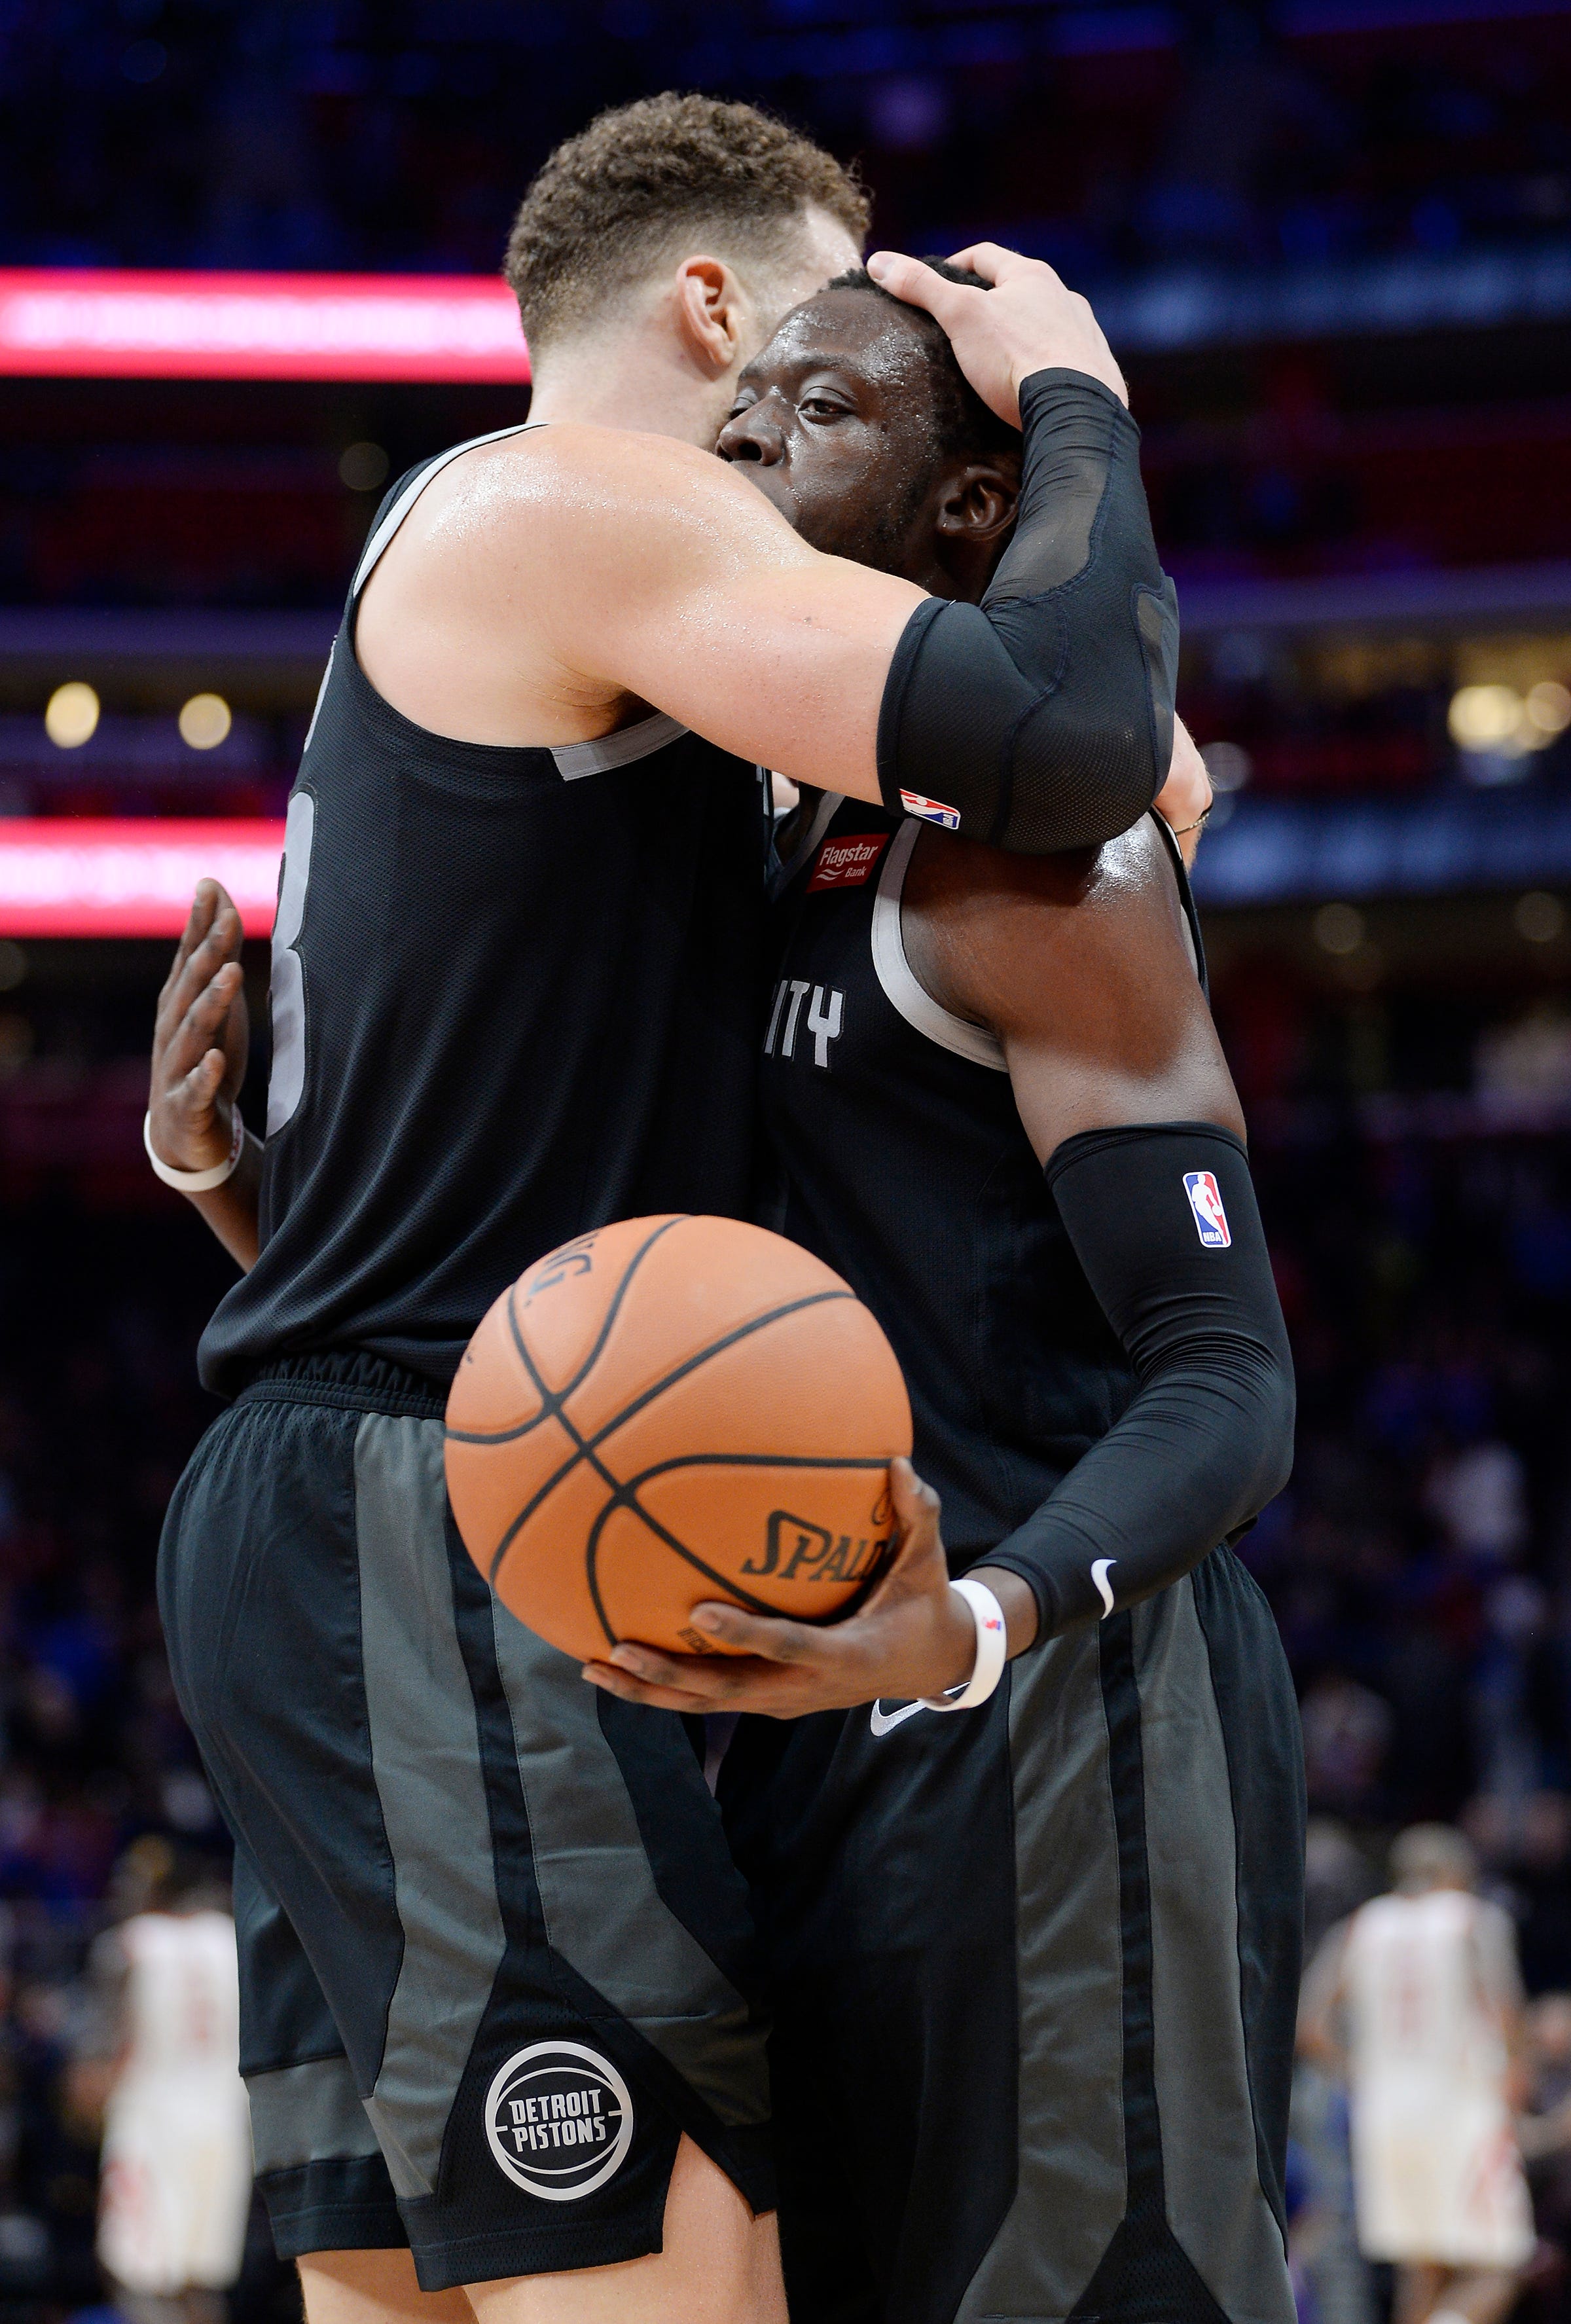 From left, Pistons' Blake Griffin congratulates Reggie Jackson at the end of the game after the Pistons win 116-111 in overtime over Houston Rockets, Little Caesars Arena, November, 23, 2018, Detroit, Mi.